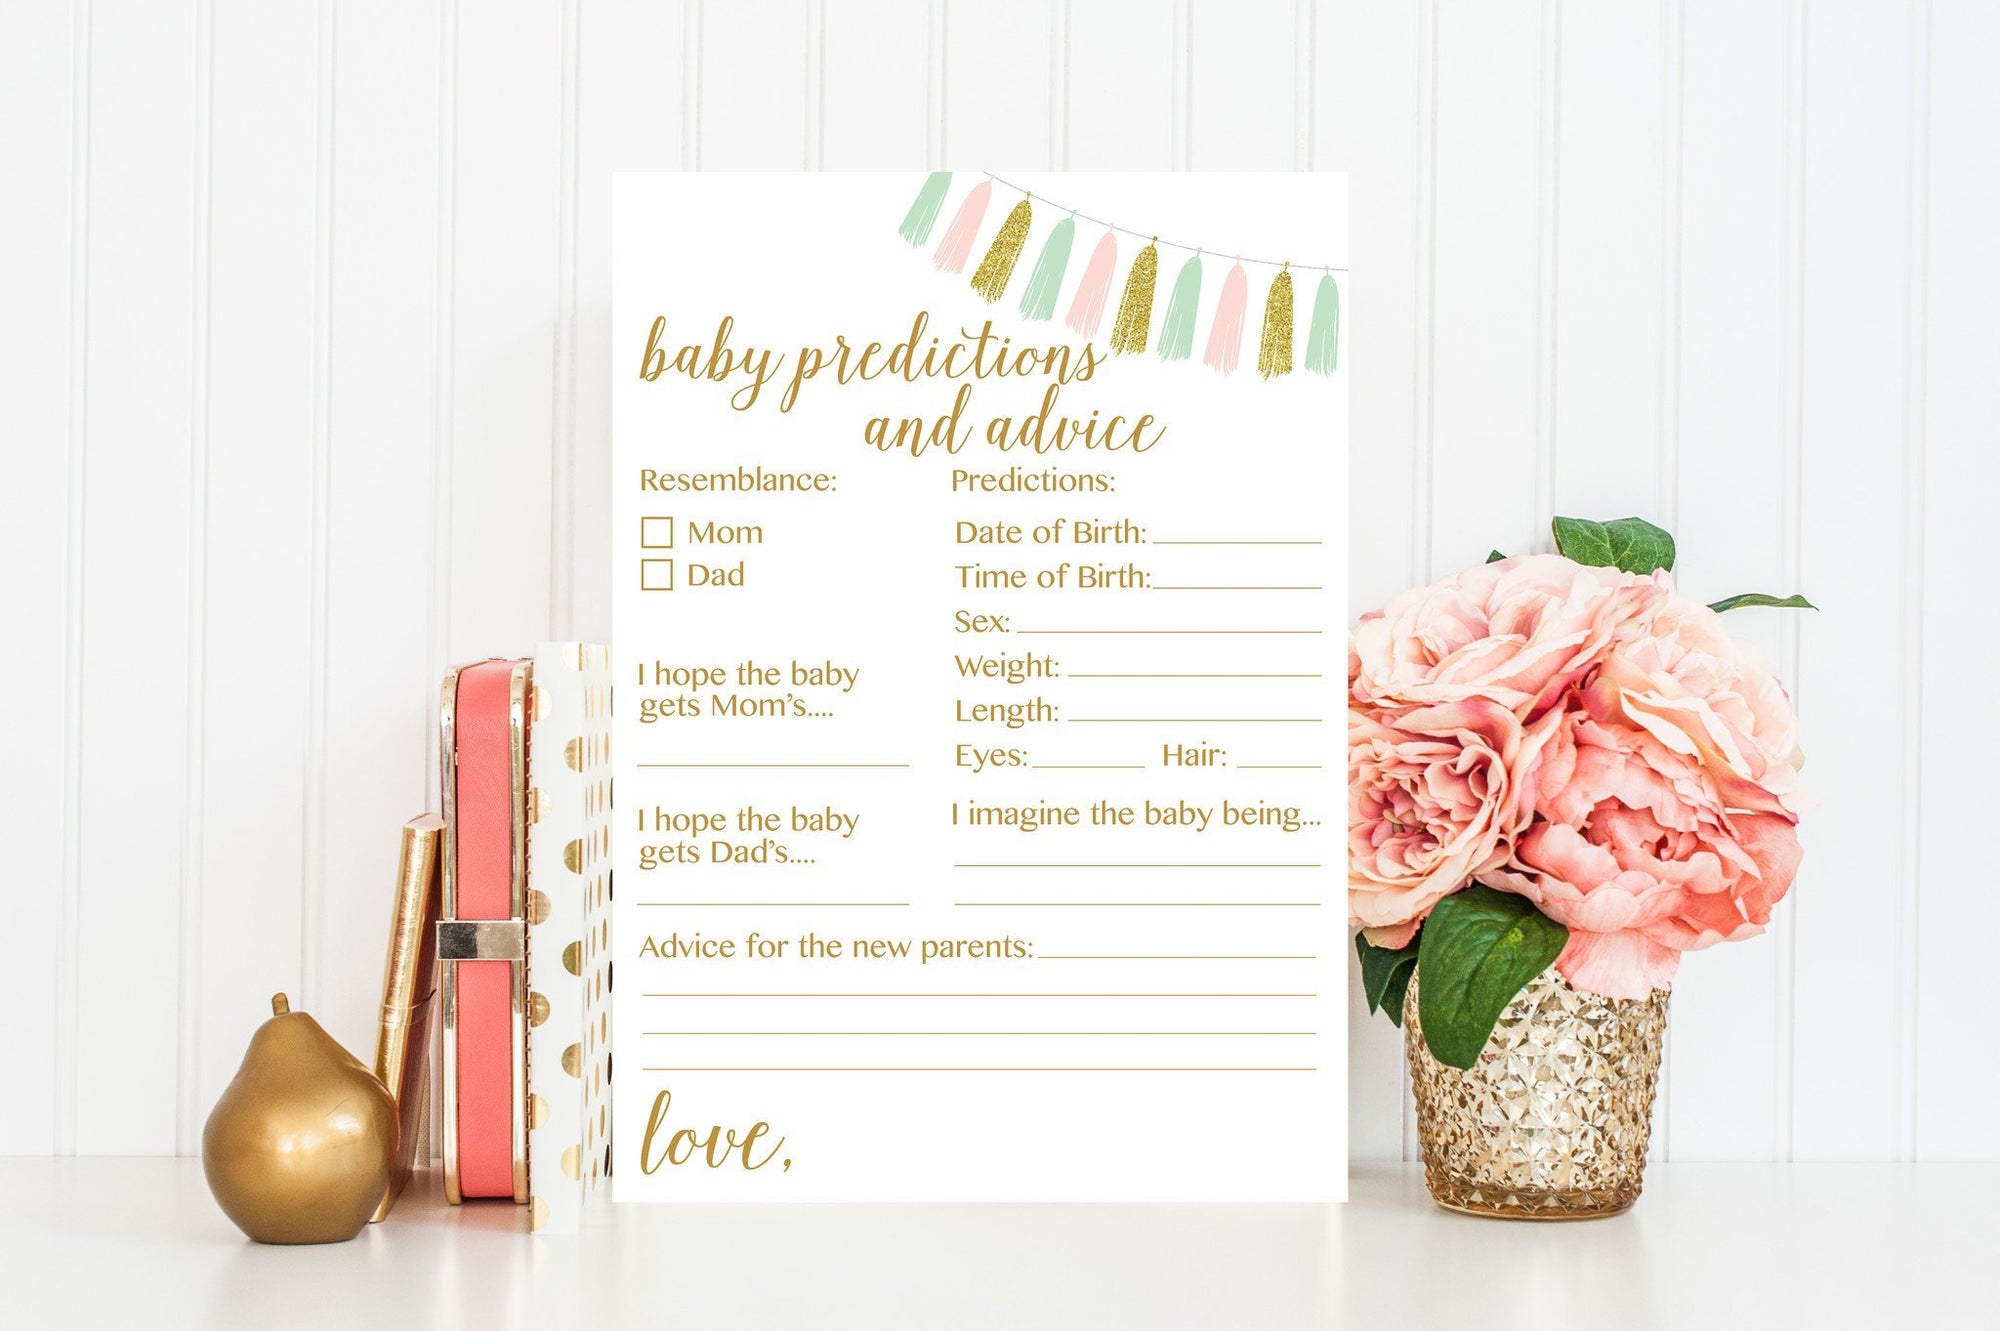 Baby Predictions and Advice (with Sex) - Pink, Mint & Gold Tassel Printable - Pretty Collected